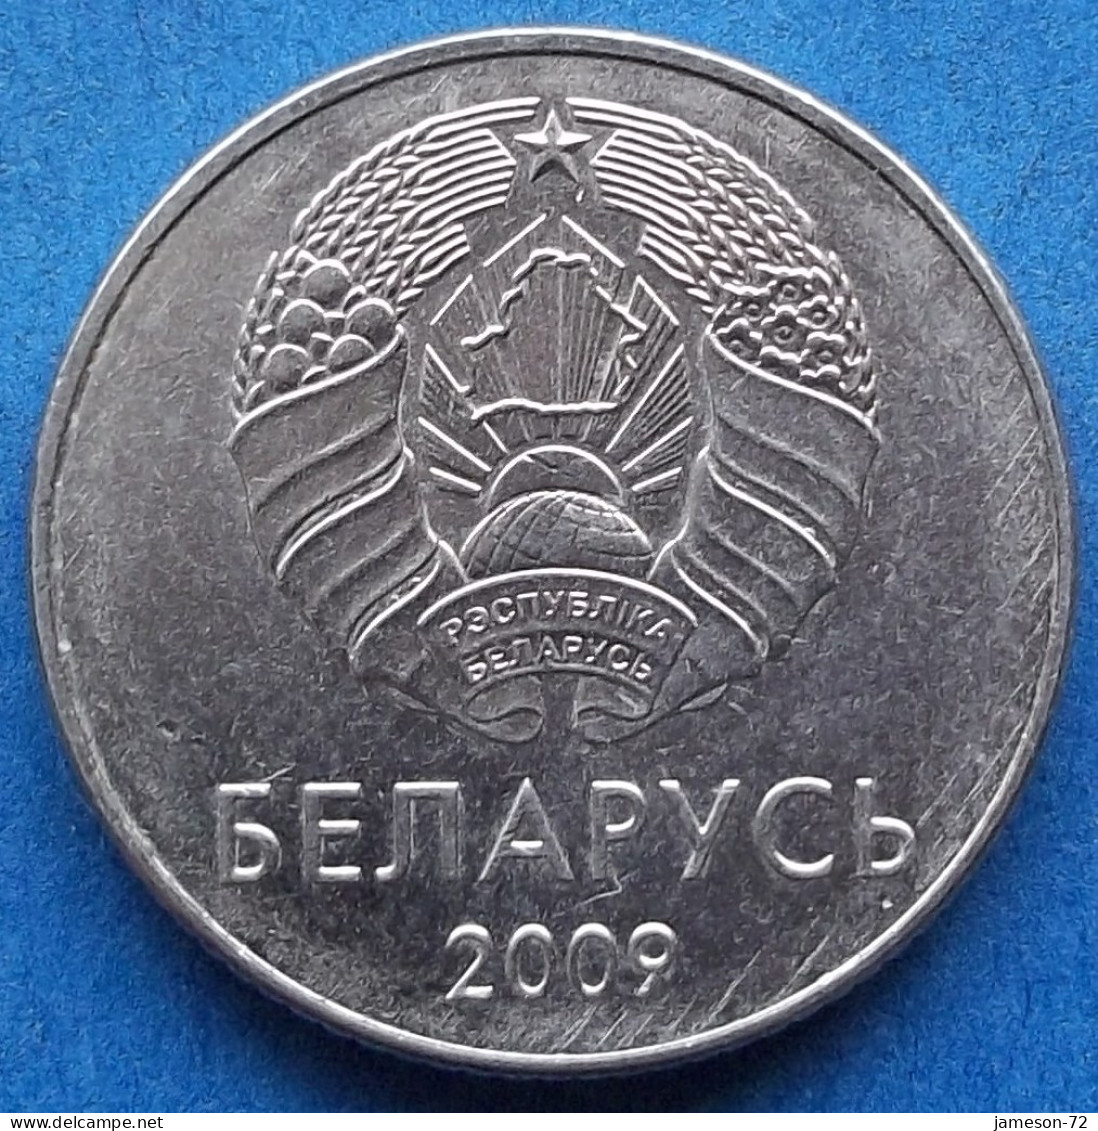 BELARUS - 1 Rouble 2009 KM# 567 Independent Republic (1991) - Edelweiss Coins - Belarus